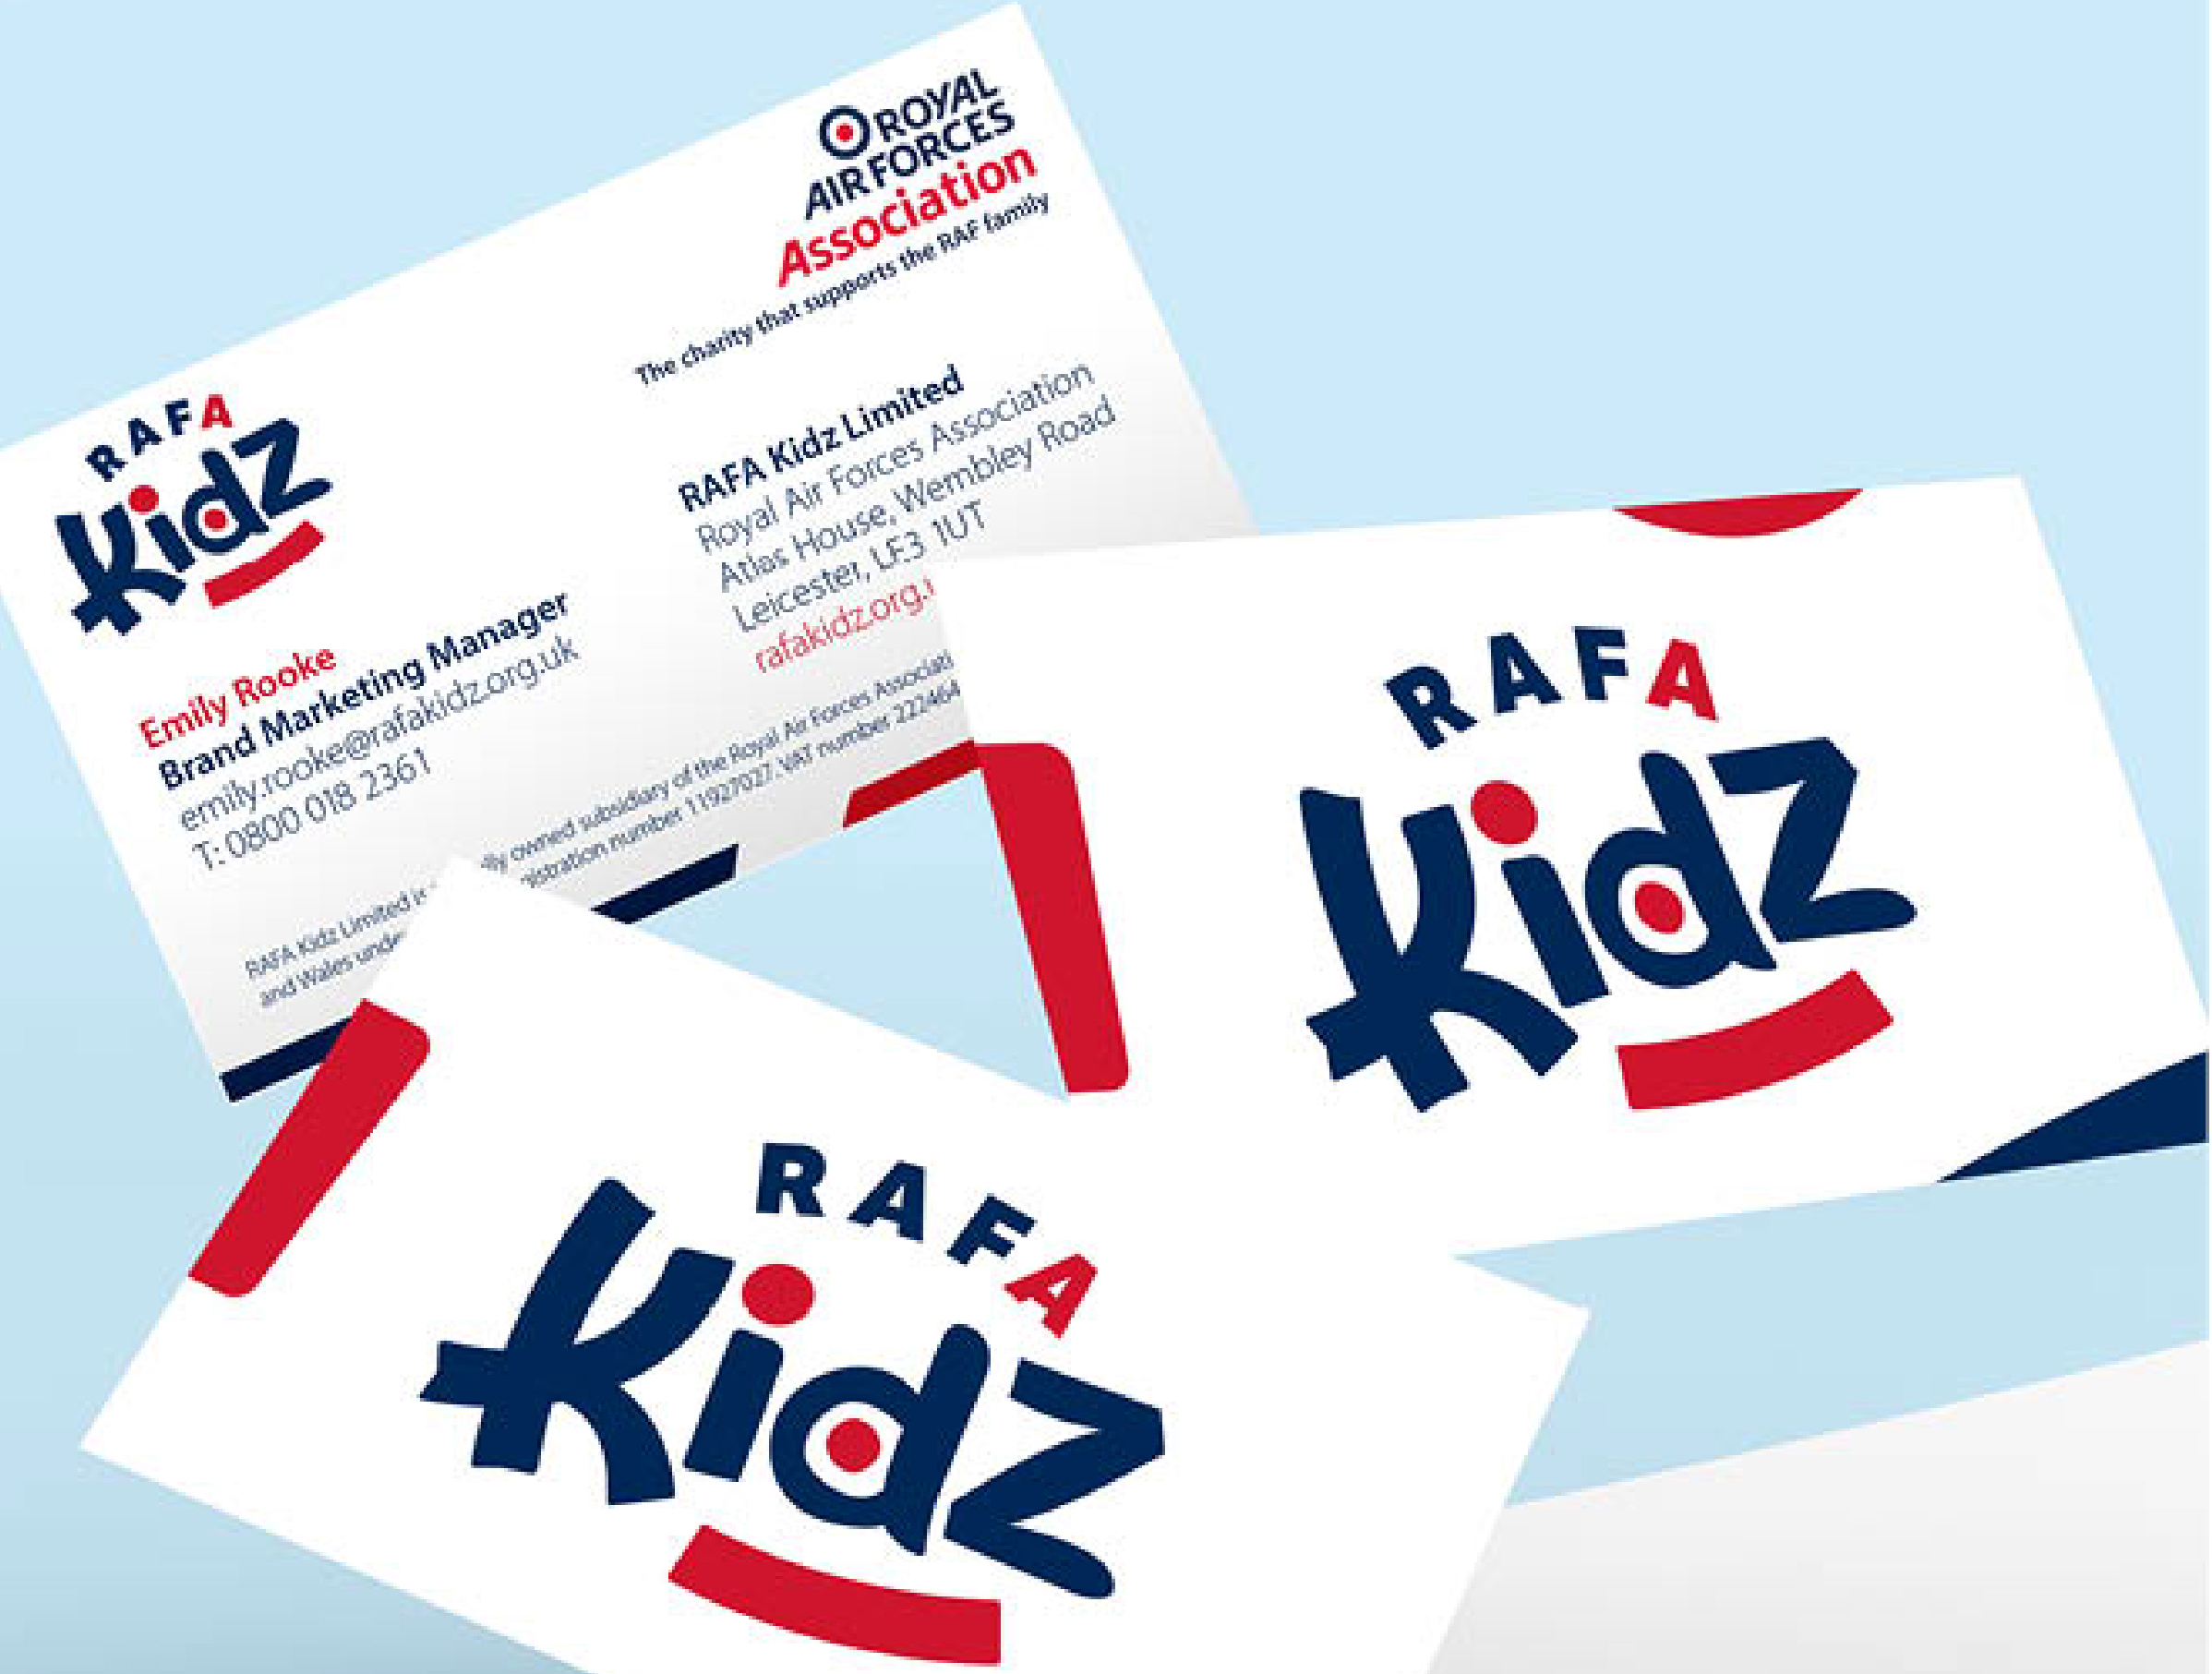 RAFA Kidz business cards. logo features an RAF symbol in the letter D